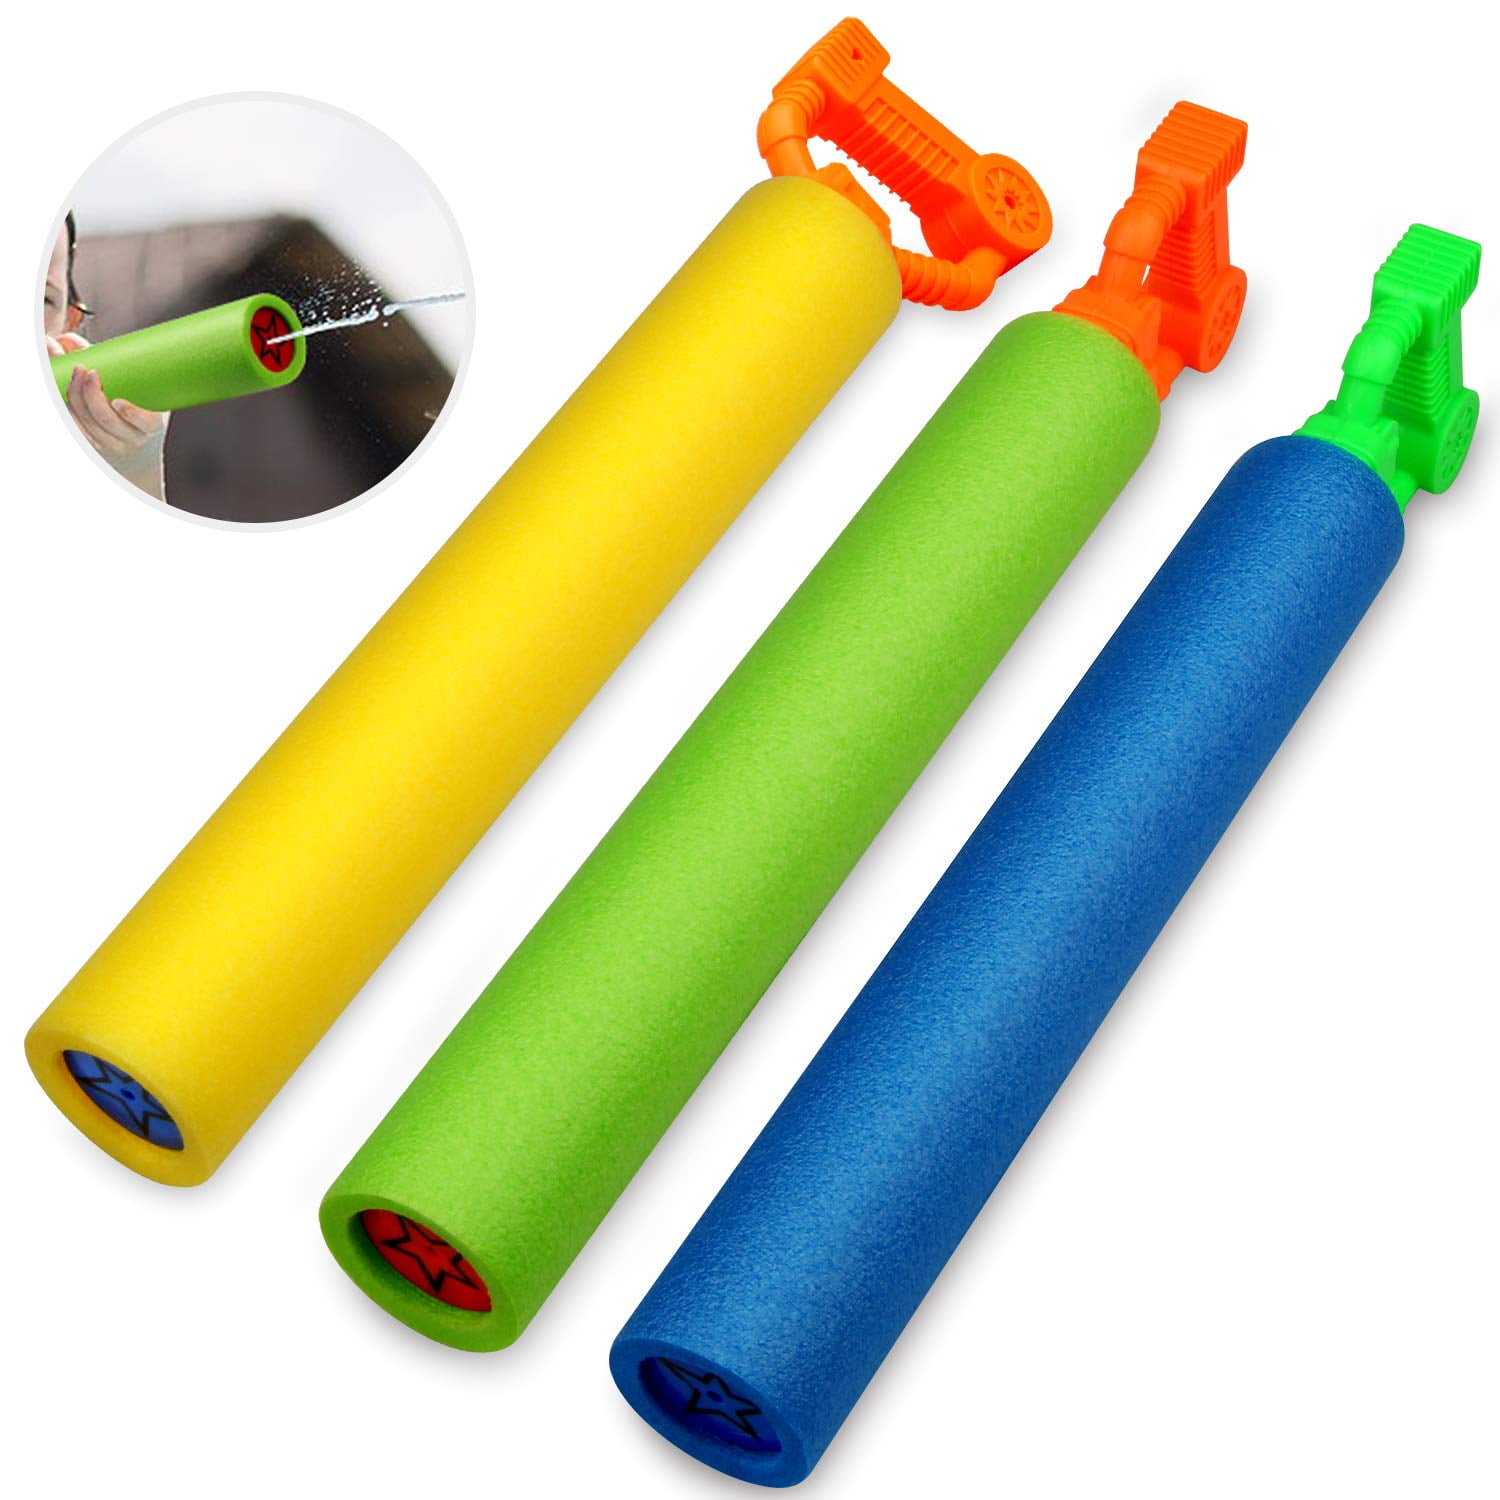 Peroptimist 3Pack Water Guns for Kids, Super Soaker Foam Water Blaster Shooter Summer Fun, Water Guns for Outdoor Swimming Pool, Games Toys for Boys Girls Adults, Three Different Colors